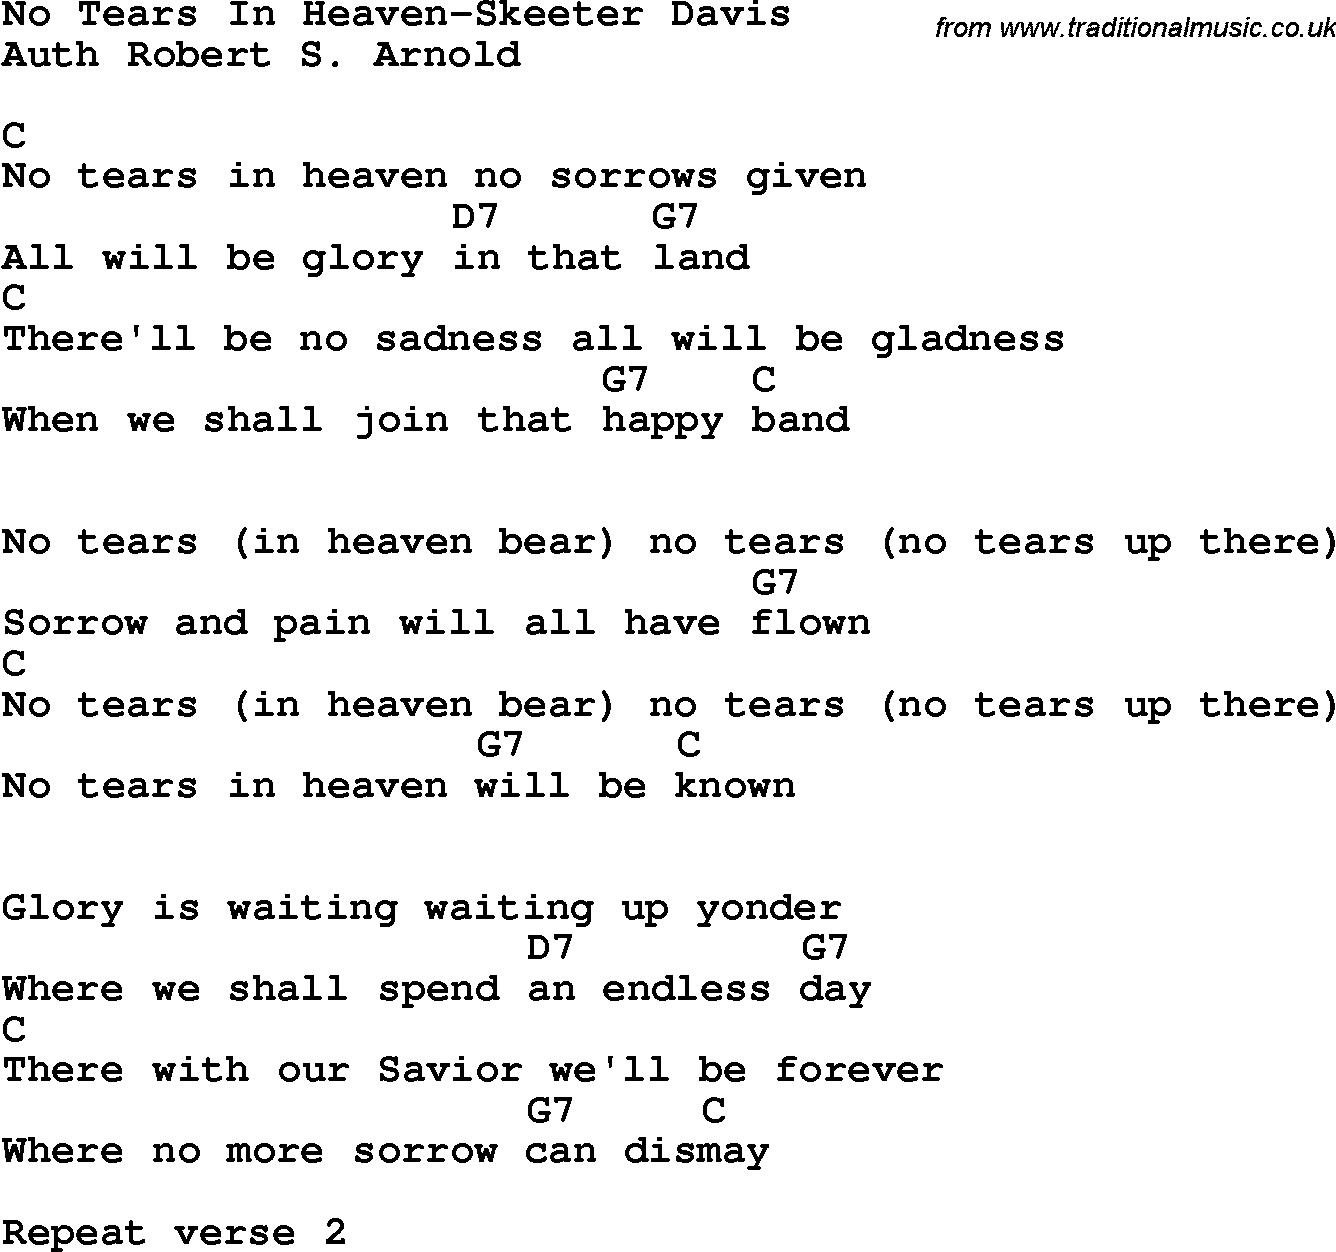 Country, Southern and Bluegrass Gospel Song No Tears In Heaven-Skeeter Davis lyrics and chords